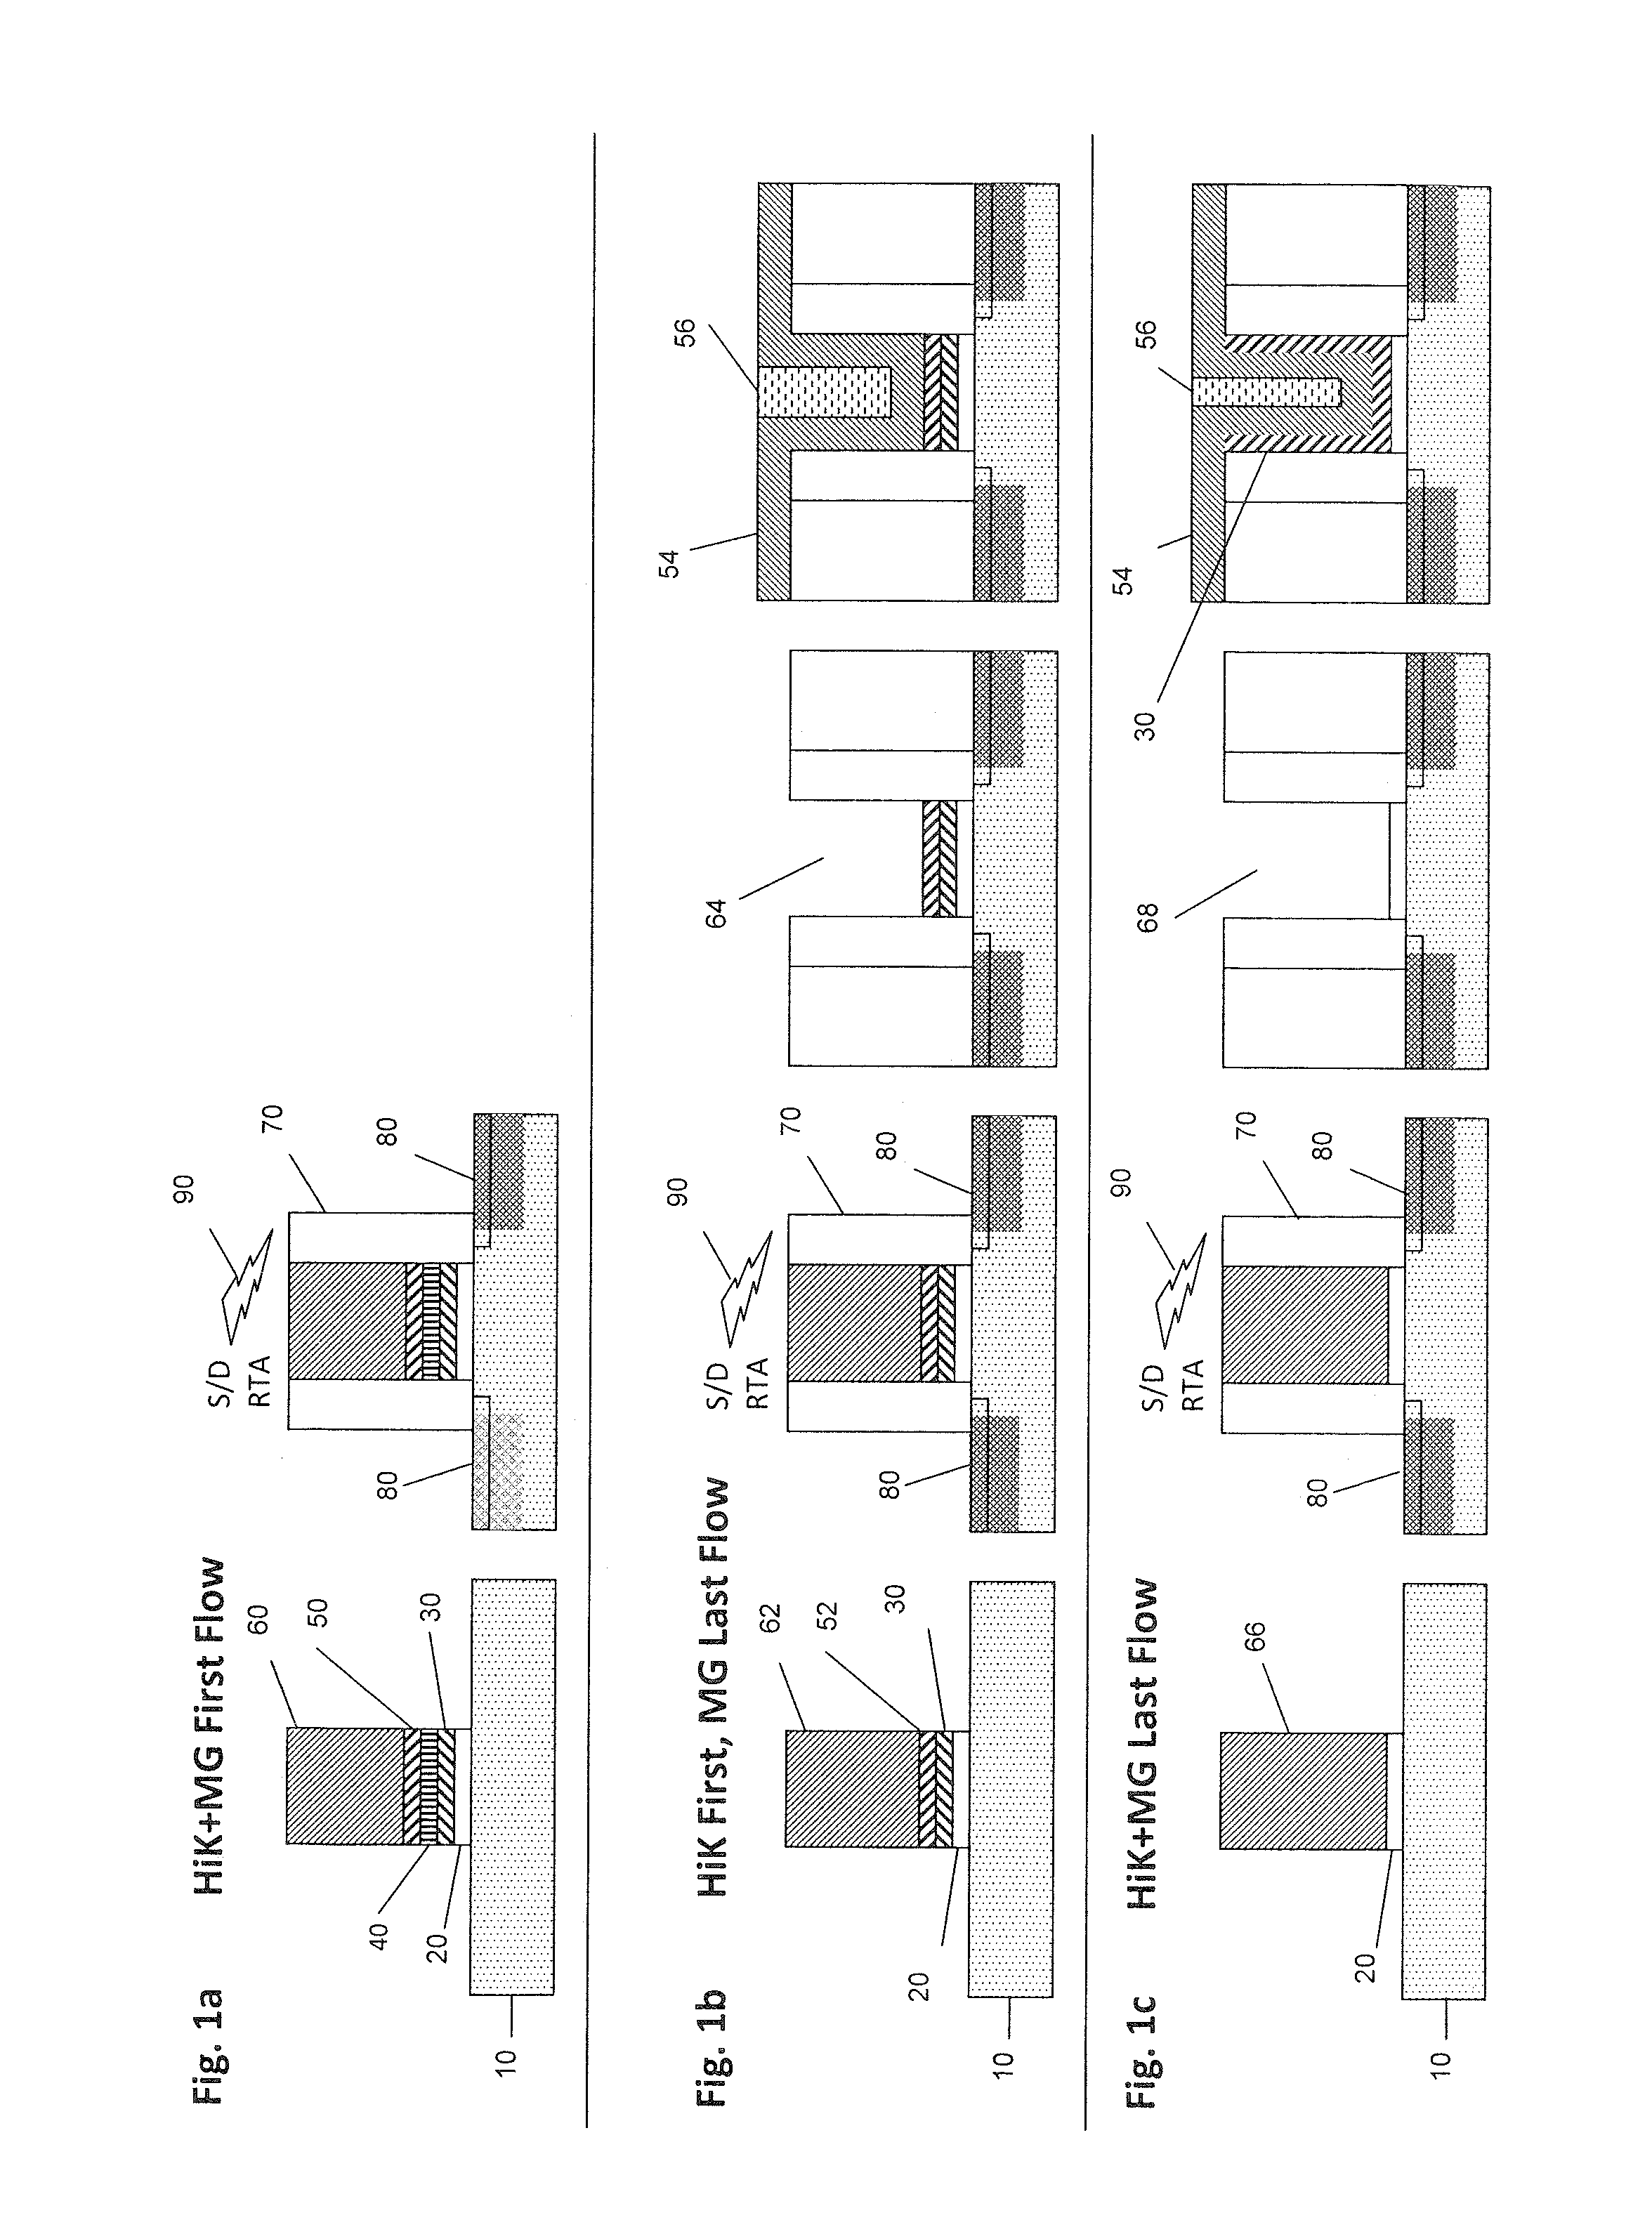 Process for depositing electrode with high effective work function